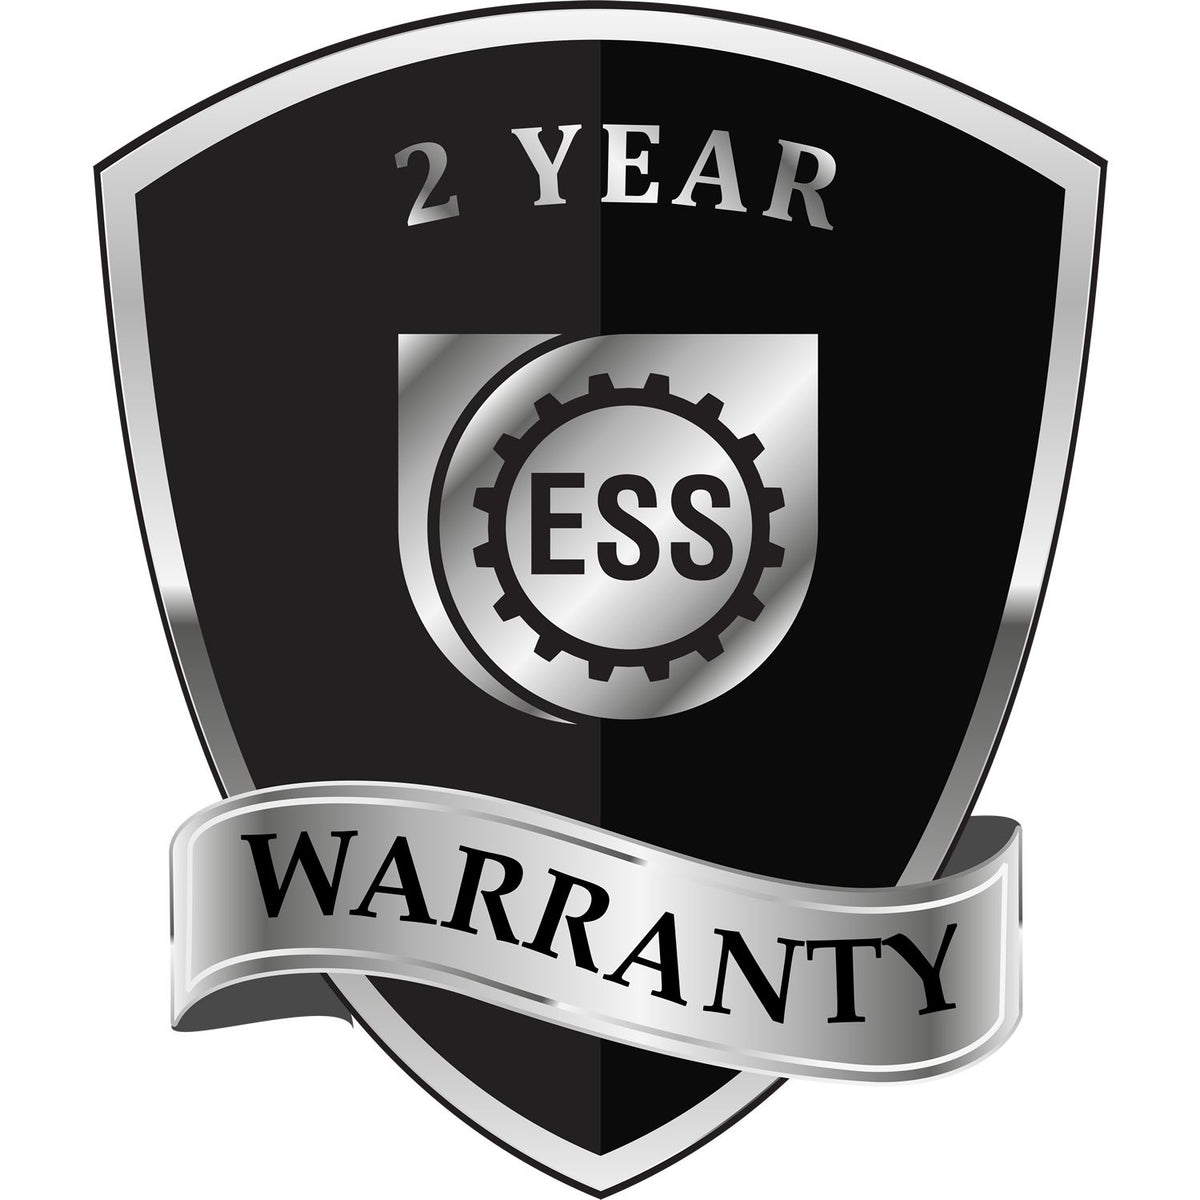 A black and silver badge or emblem showing warranty information for the Hybrid North Carolina Geologist Seal